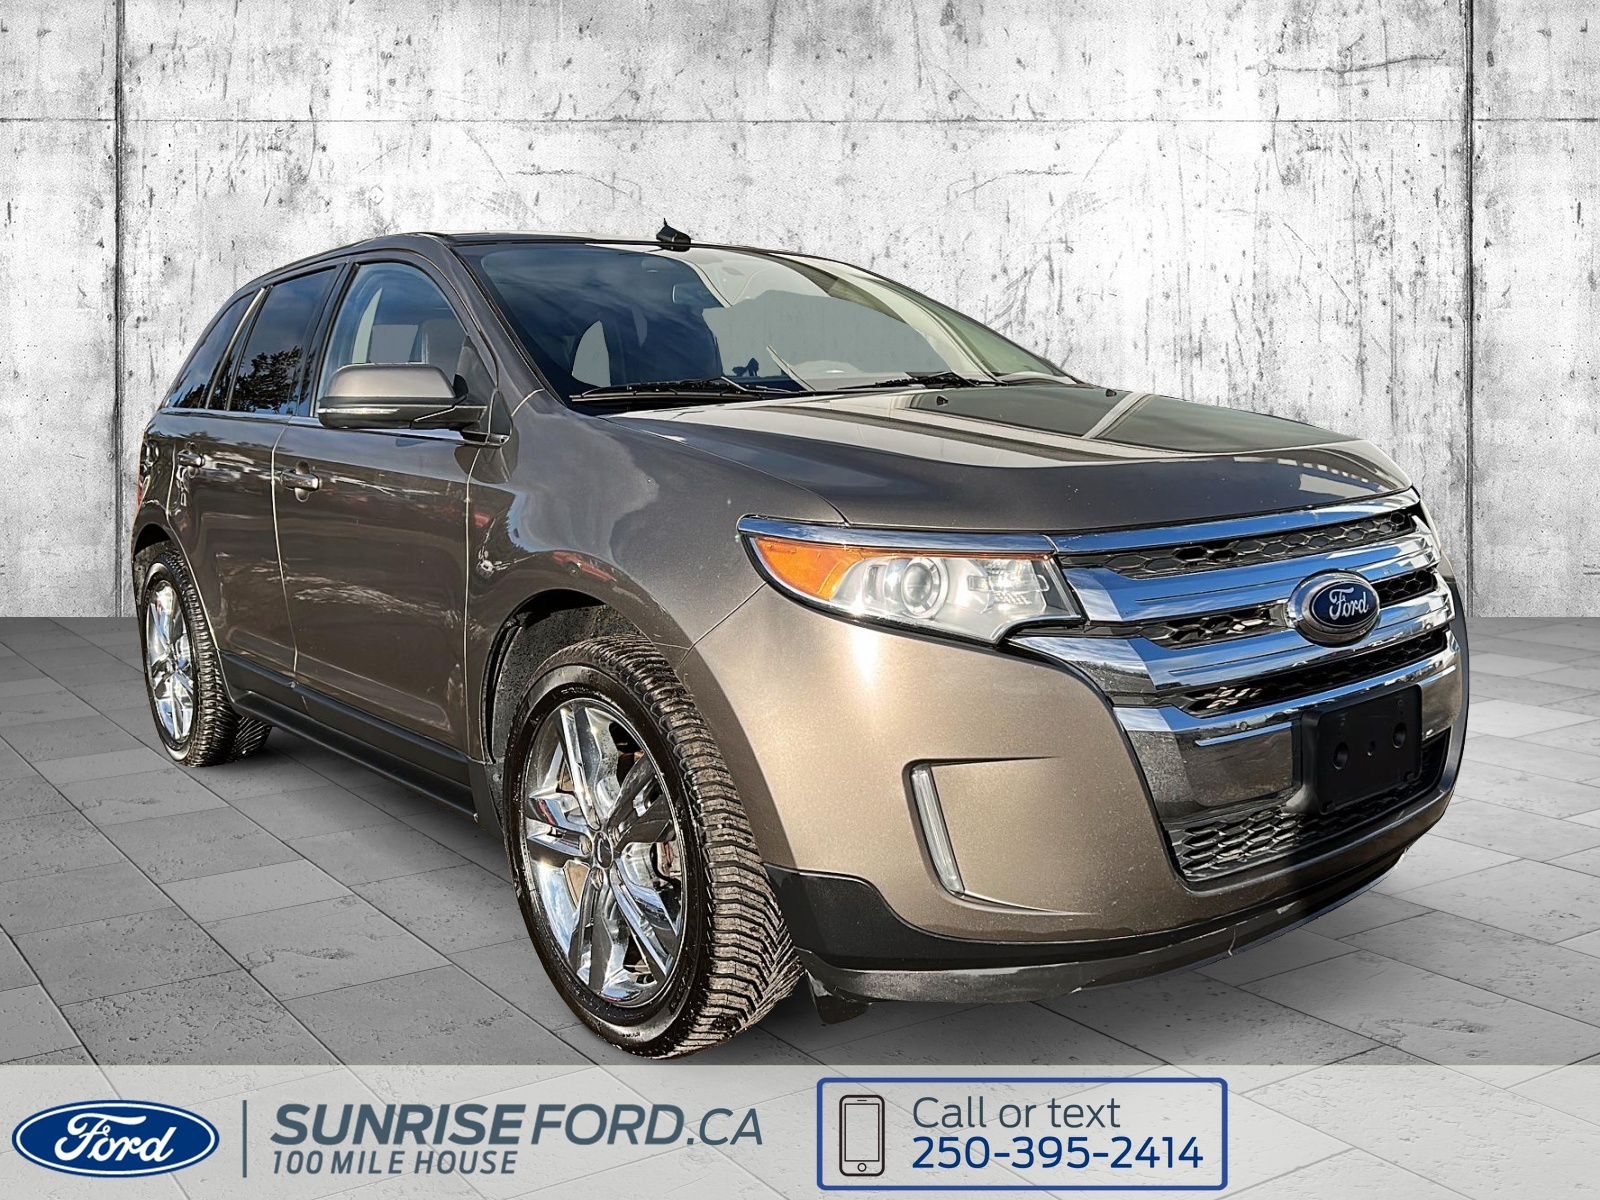 2013 Ford Edge LIMITED